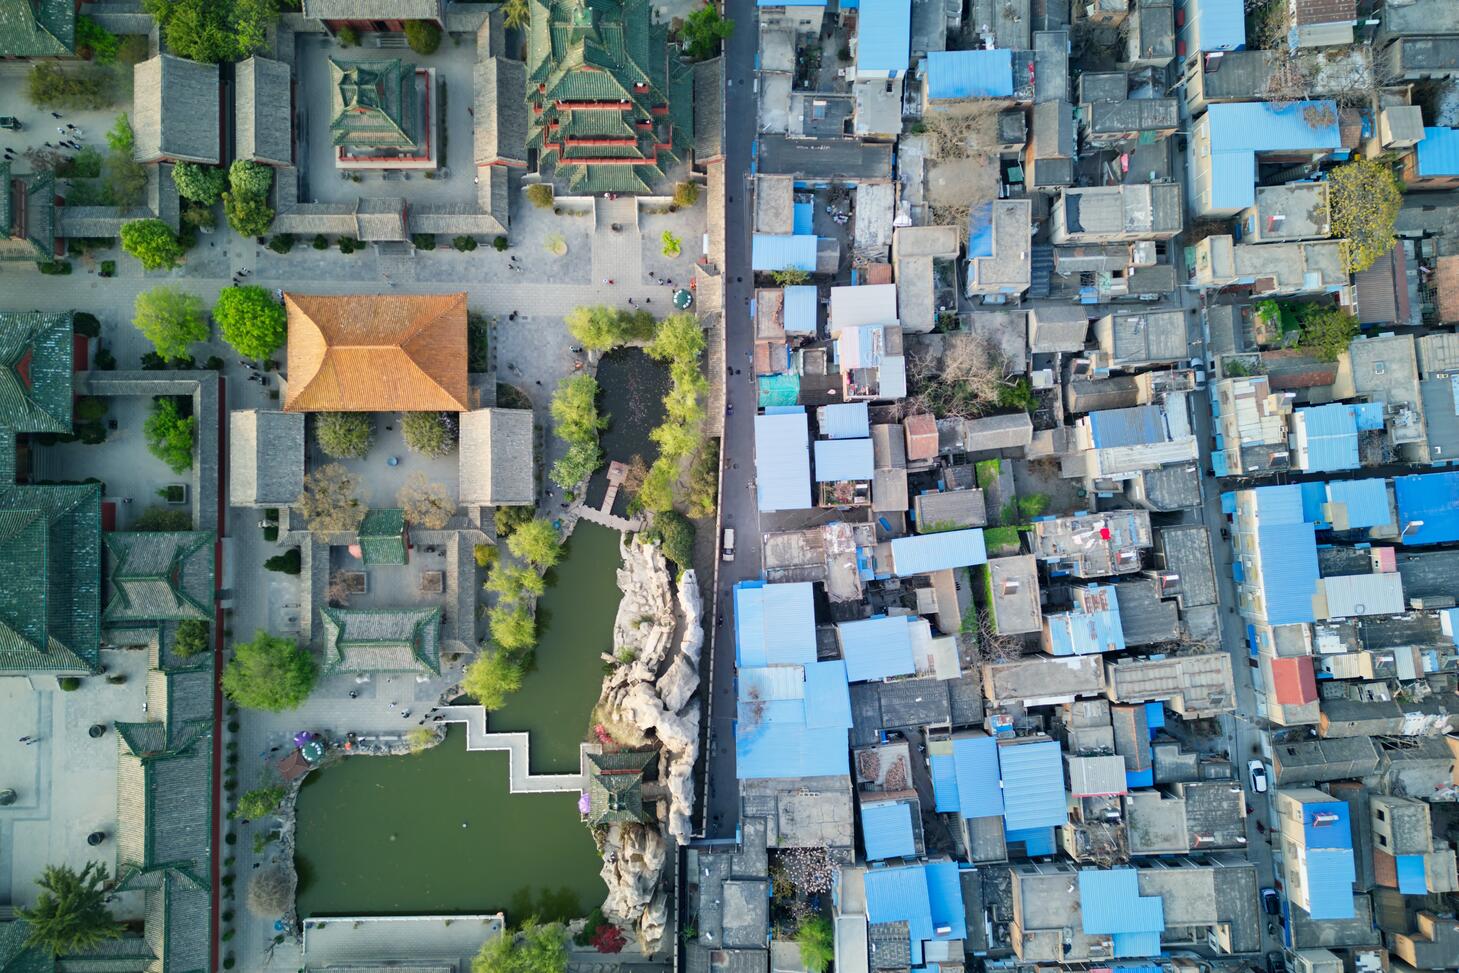 Rich and poor as seen from the sky. Photo by Justin Zhu on Unsplash.